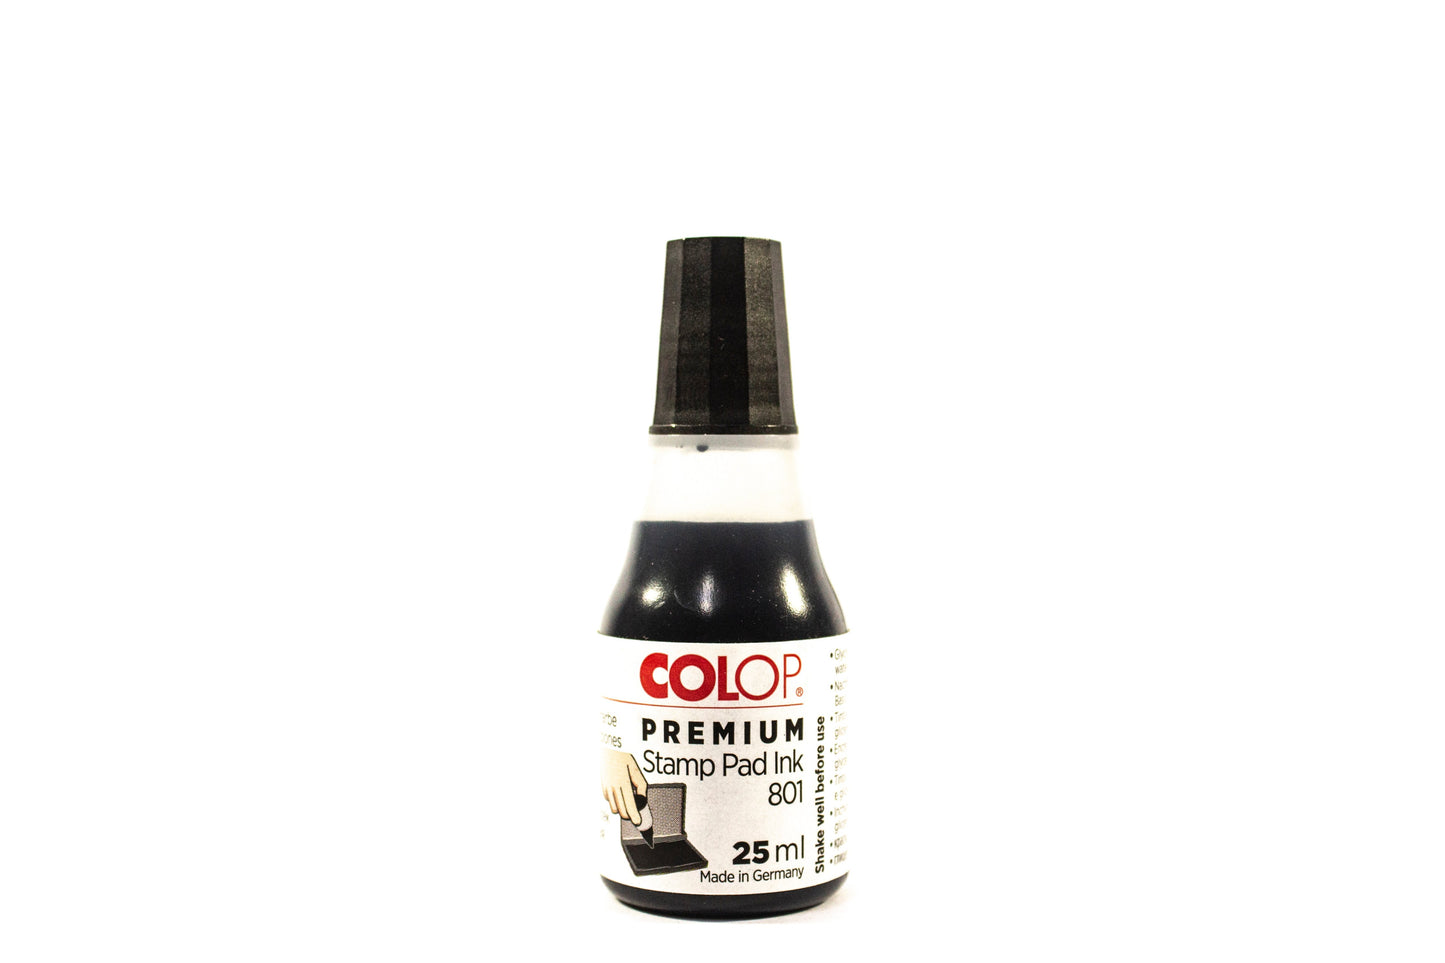 Colop Premium Stamp Pad Ink 801 | Sold by 10s